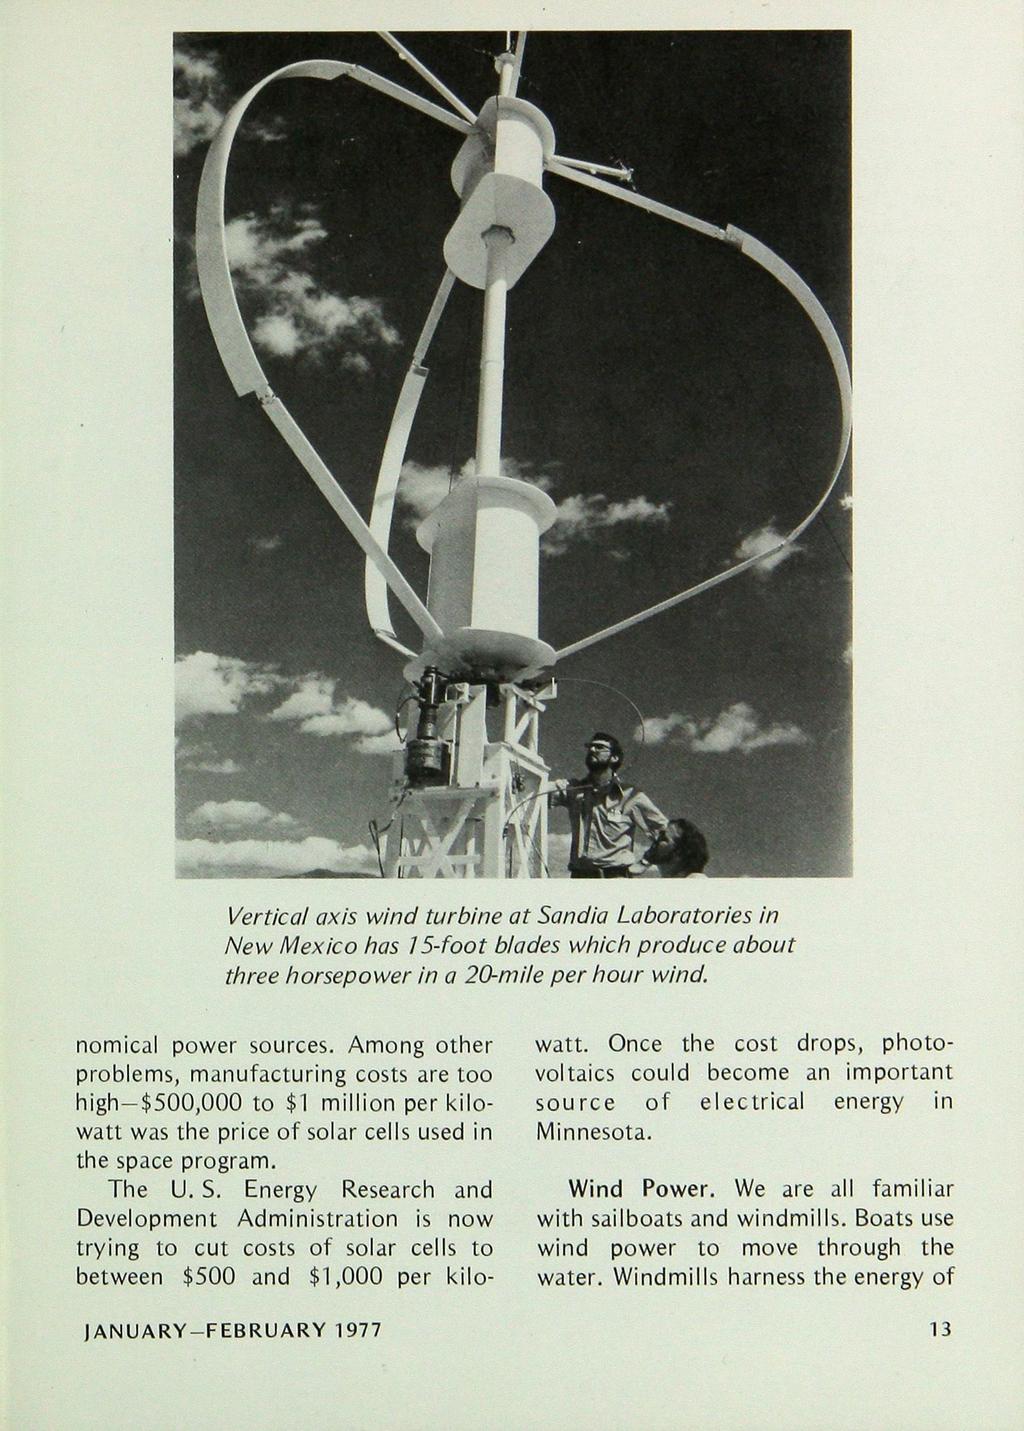 Vertical axis wind turbine at Sandia Laboratories in New Mexico has / 5-foot blades which produce about three horsepower in a 20-mile per hour wind. nomical power sources.